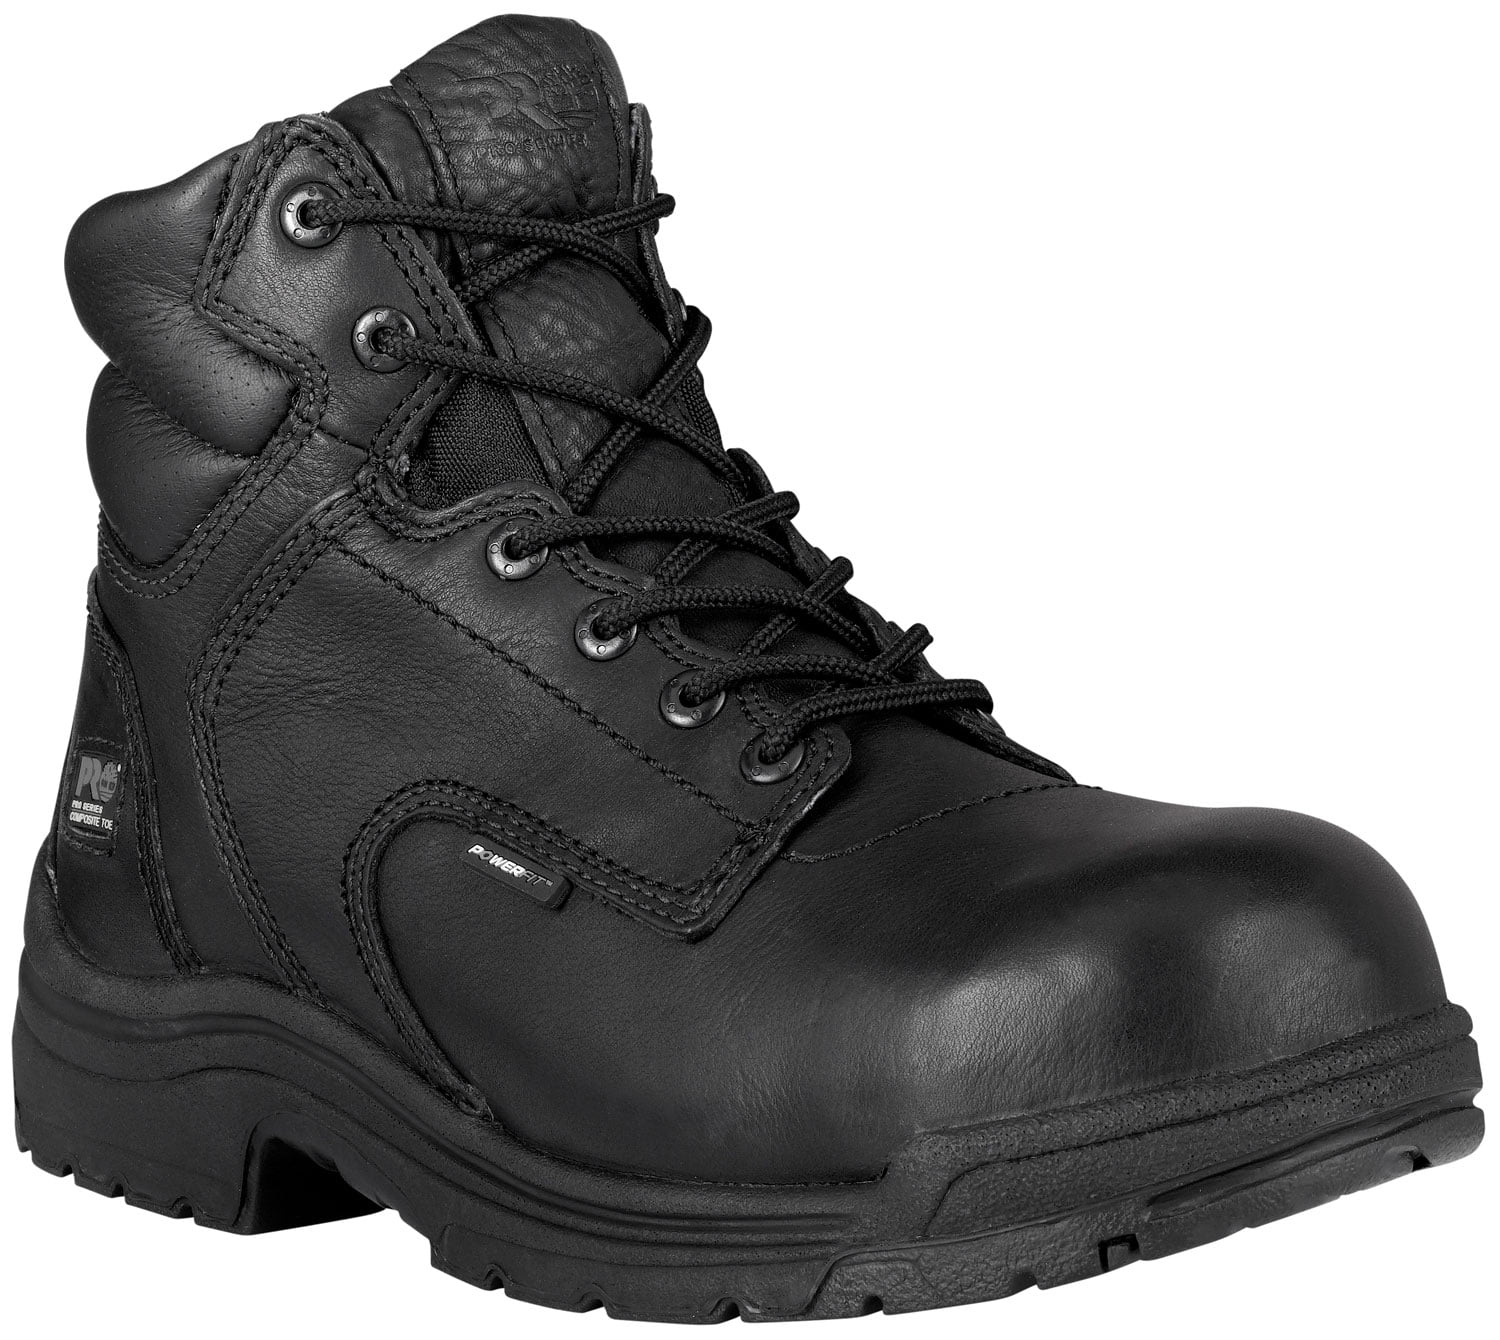 NEPA High Top Outdoor Safety Work Shoes Indestructible Steel Toe Zipper 6inch 